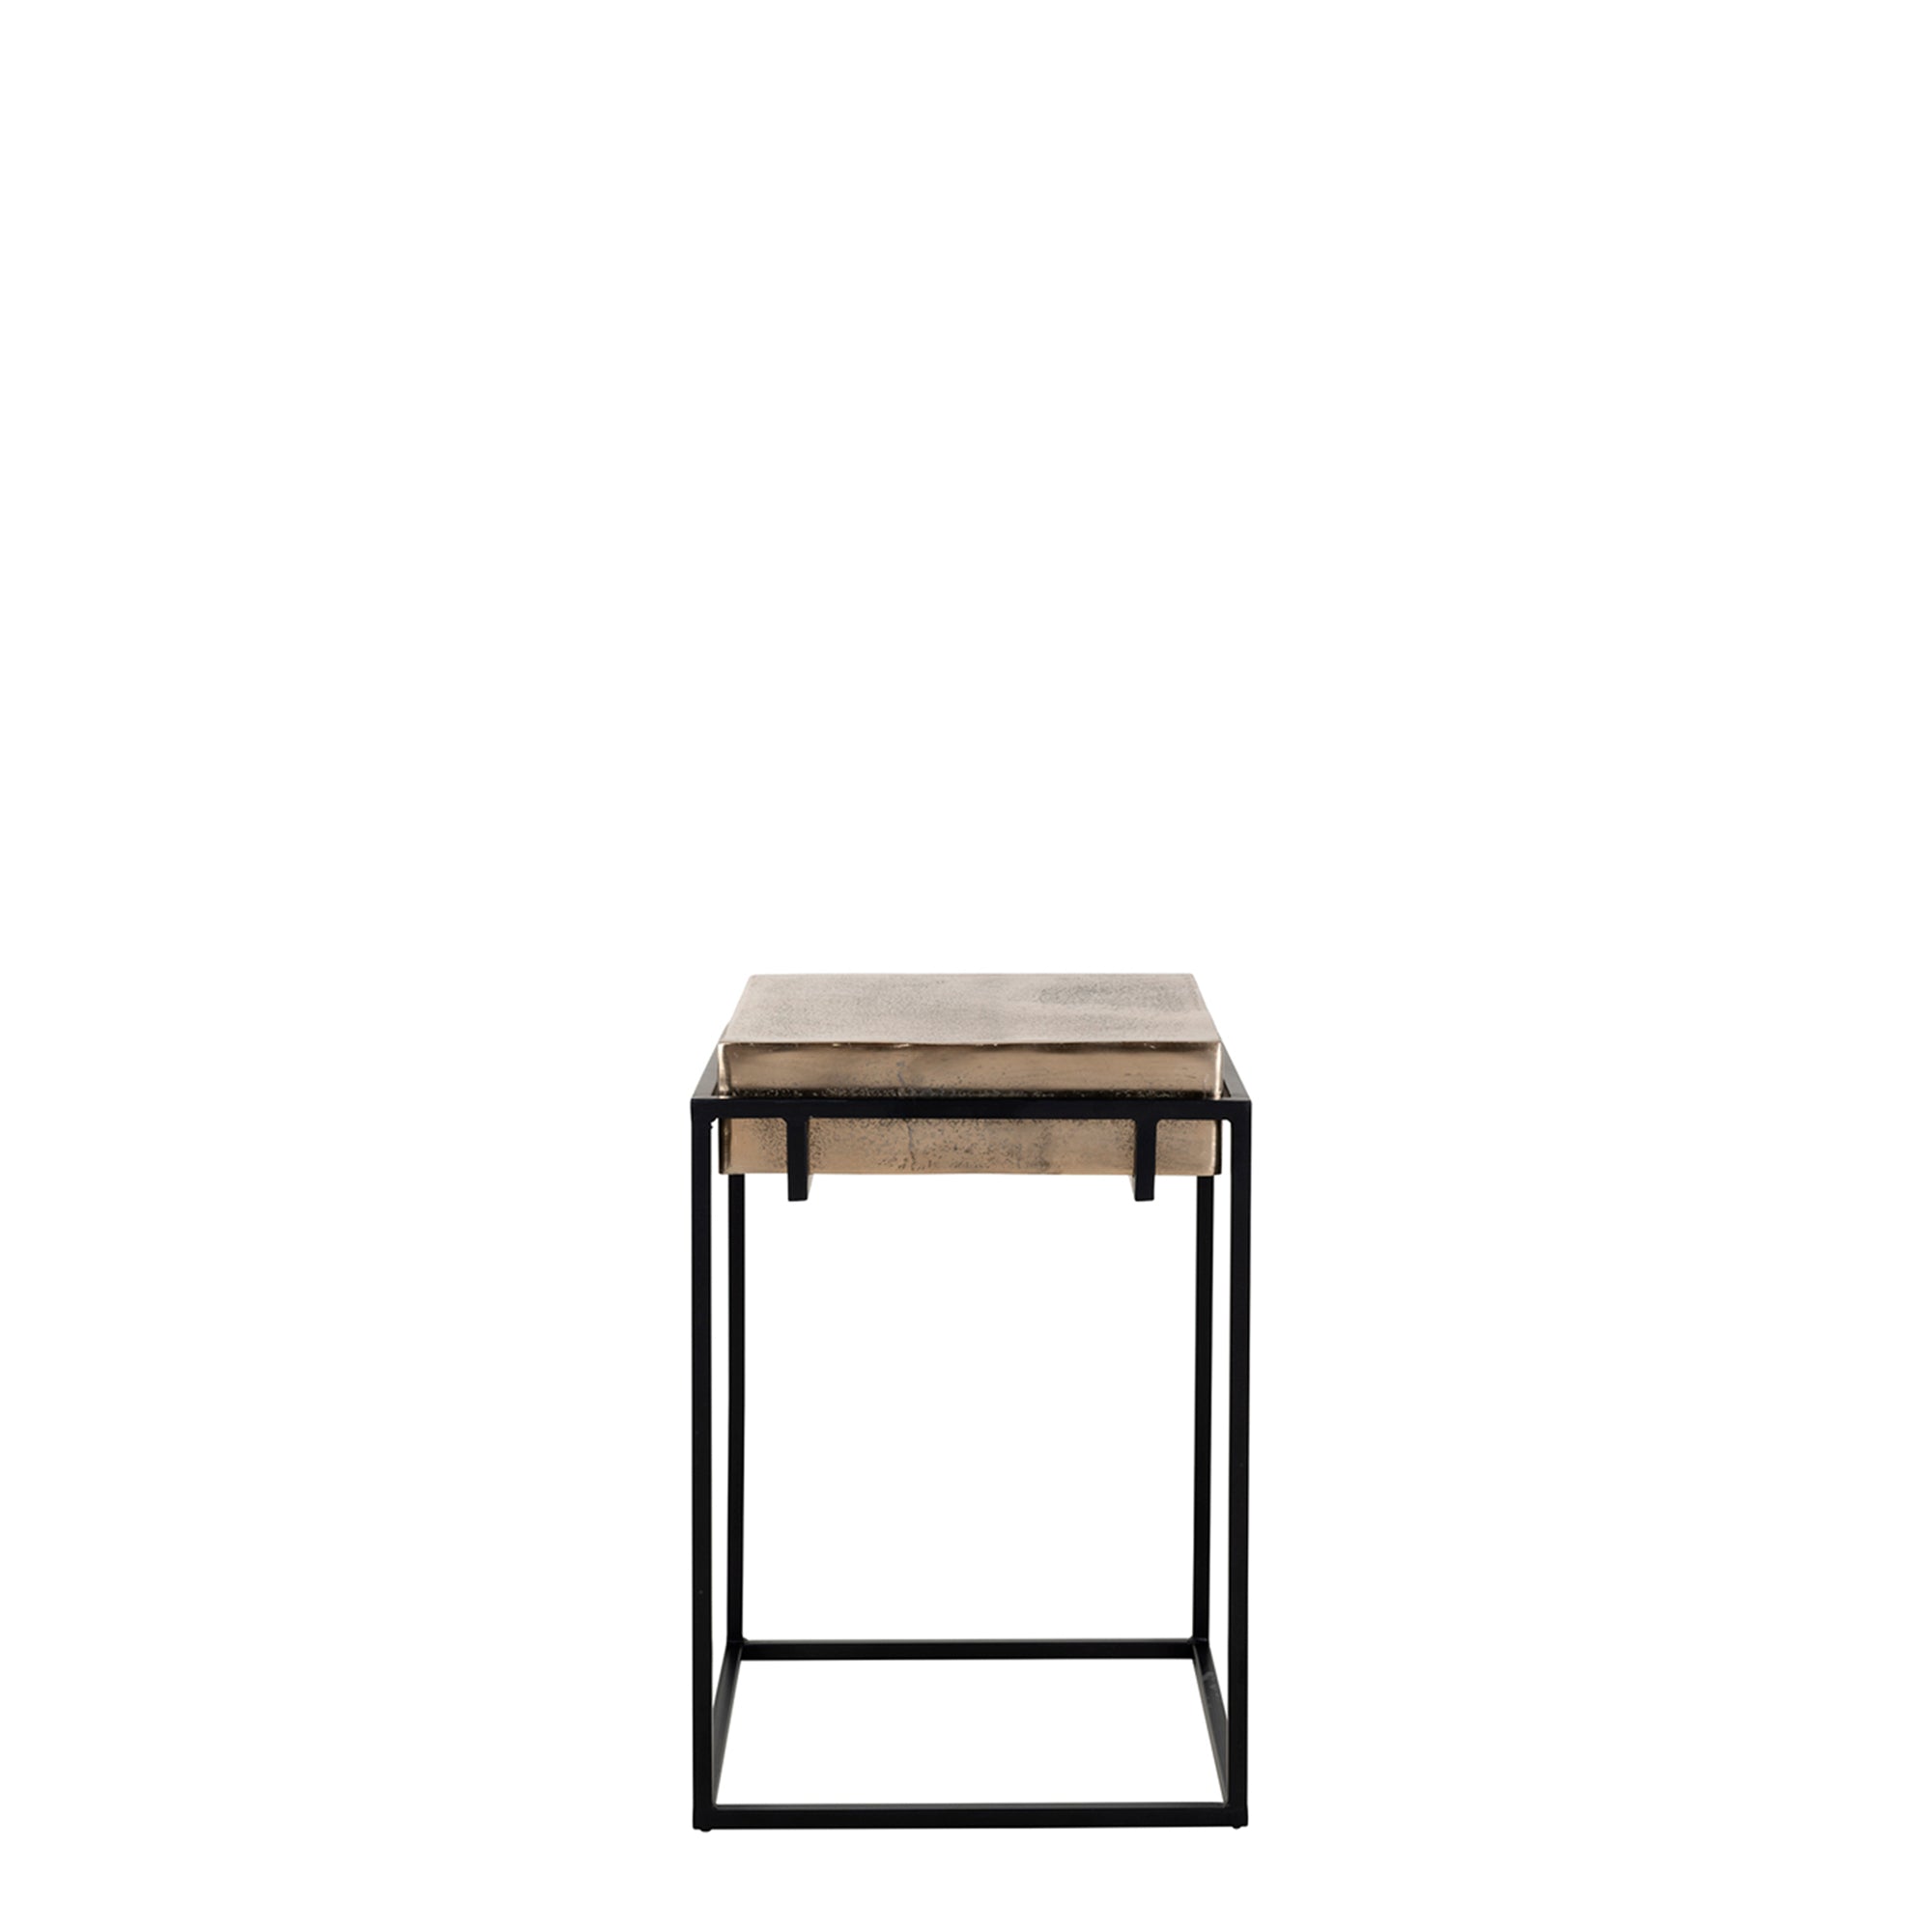 Fairway - End Table Champagne Finish